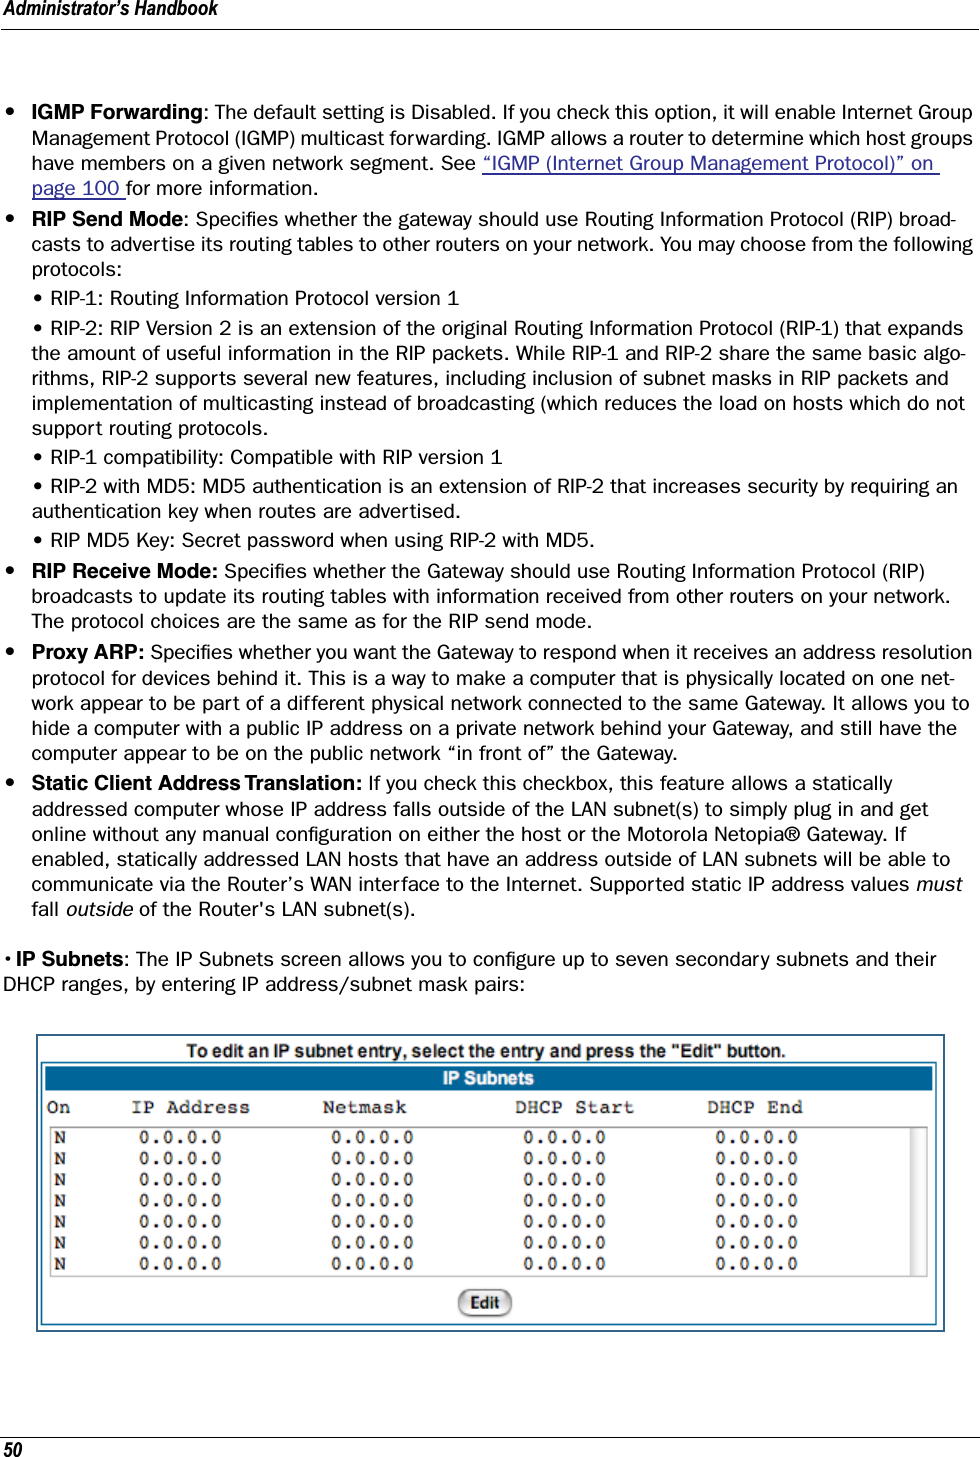 Administrator’s Handbook50•IGMP Forwarding: The default setting is Disabled. If you check this option, it will enable Internet Group Management Protocol (IGMP) multicast forwarding. IGMP allows a router to determine which host groups have members on a given network segment. See “IGMP (Internet Group Management Protocol)” on page 100 for more information.•RIP Send Mode: Speciﬁes whether the gateway should use Routing Information Protocol (RIP) broad-casts to advertise its routing tables to other routers on your network. You may choose from the following protocols:• RIP-1: Routing Information Protocol version 1• RIP-2: RIP Version 2 is an extension of the original Routing Information Protocol (RIP-1) that expands the amount of useful information in the RIP packets. While RIP-1 and RIP-2 share the same basic algo-rithms, RIP-2 supports several new features, including inclusion of subnet masks in RIP packets and implementation of multicasting instead of broadcasting (which reduces the load on hosts which do not support routing protocols.• RIP-1 compatibility: Compatible with RIP version 1• RIP-2 with MD5: MD5 authentication is an extension of RIP-2 that increases security by requiring an authentication key when routes are advertised.• RIP MD5 Key: Secret password when using RIP-2 with MD5. •RIP Receive Mode: Speciﬁes whether the Gateway should use Routing Information Protocol (RIP) broadcasts to update its routing tables with information received from other routers on your network. The protocol choices are the same as for the RIP send mode.•Proxy ARP: Speciﬁes whether you want the Gateway to respond when it receives an address resolution protocol for devices behind it. This is a way to make a computer that is physically located on one net-work appear to be part of a different physical network connected to the same Gateway. It allows you to hide a computer with a public IP address on a private network behind your Gateway, and still have the computer appear to be on the public network “in front of” the Gateway.•Static Client Address Translation: If you check this checkbox, this feature allows a statically addressed computer whose IP address falls outside of the LAN subnet(s) to simply plug in and get online without any manual conﬁguration on either the host or the Motorola Netopia® Gateway. If enabled, statically addressed LAN hosts that have an address outside of LAN subnets will be able to communicate via the Router’s WAN interface to the Internet. Supported static IP address values must fall outside of the Router&apos;s LAN subnet(s).• IP Subnets: The IP Subnets screen allows you to conﬁgure up to seven secondary subnets and their DHCP ranges, by entering IP address/subnet mask pairs: